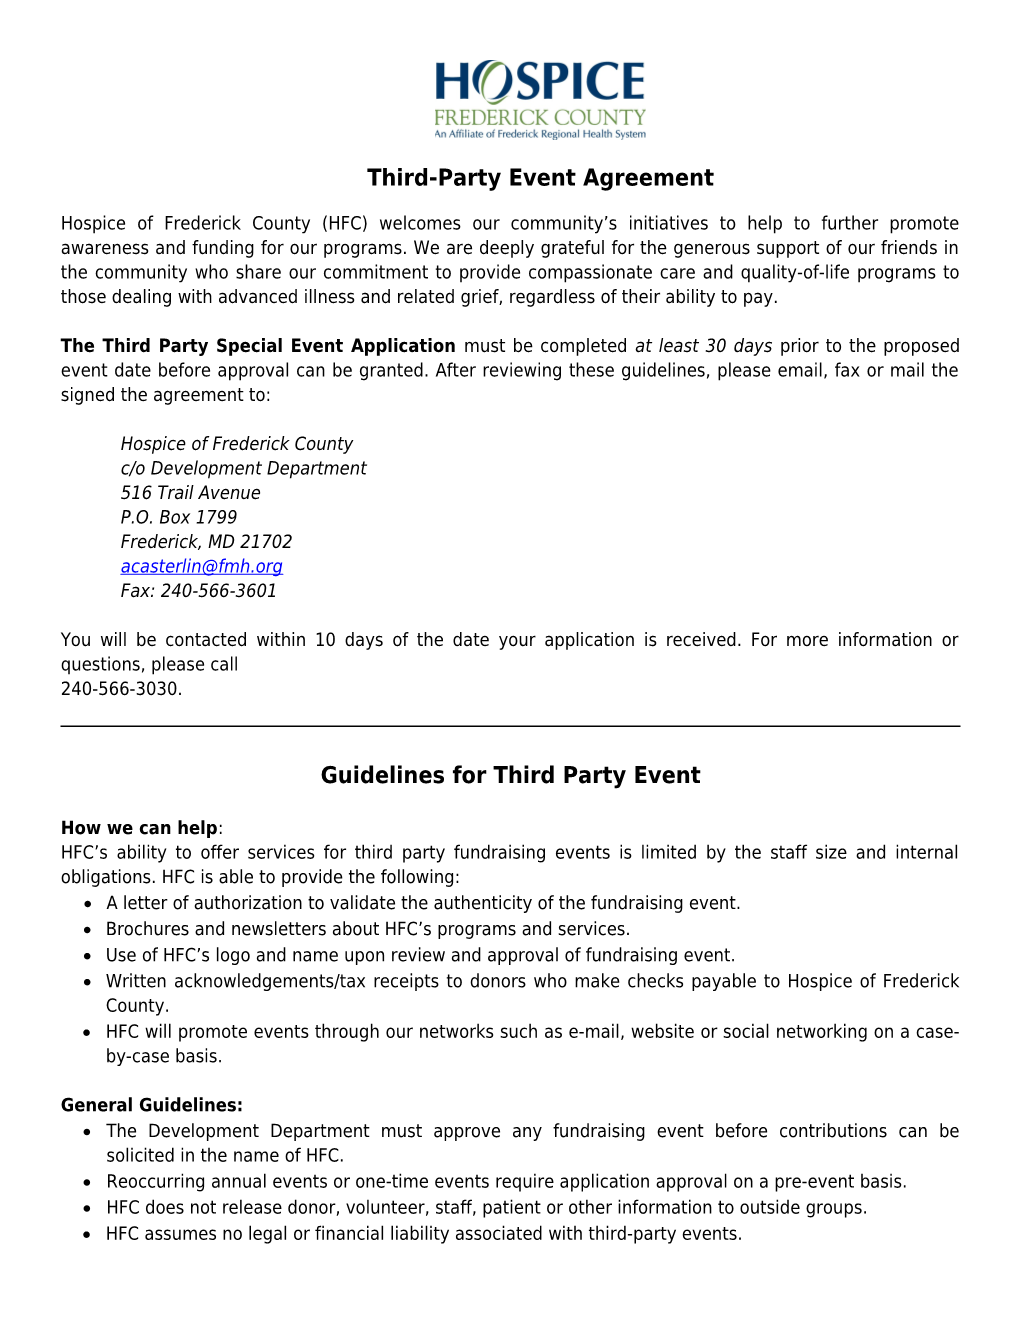 Third-Party Event Agreement